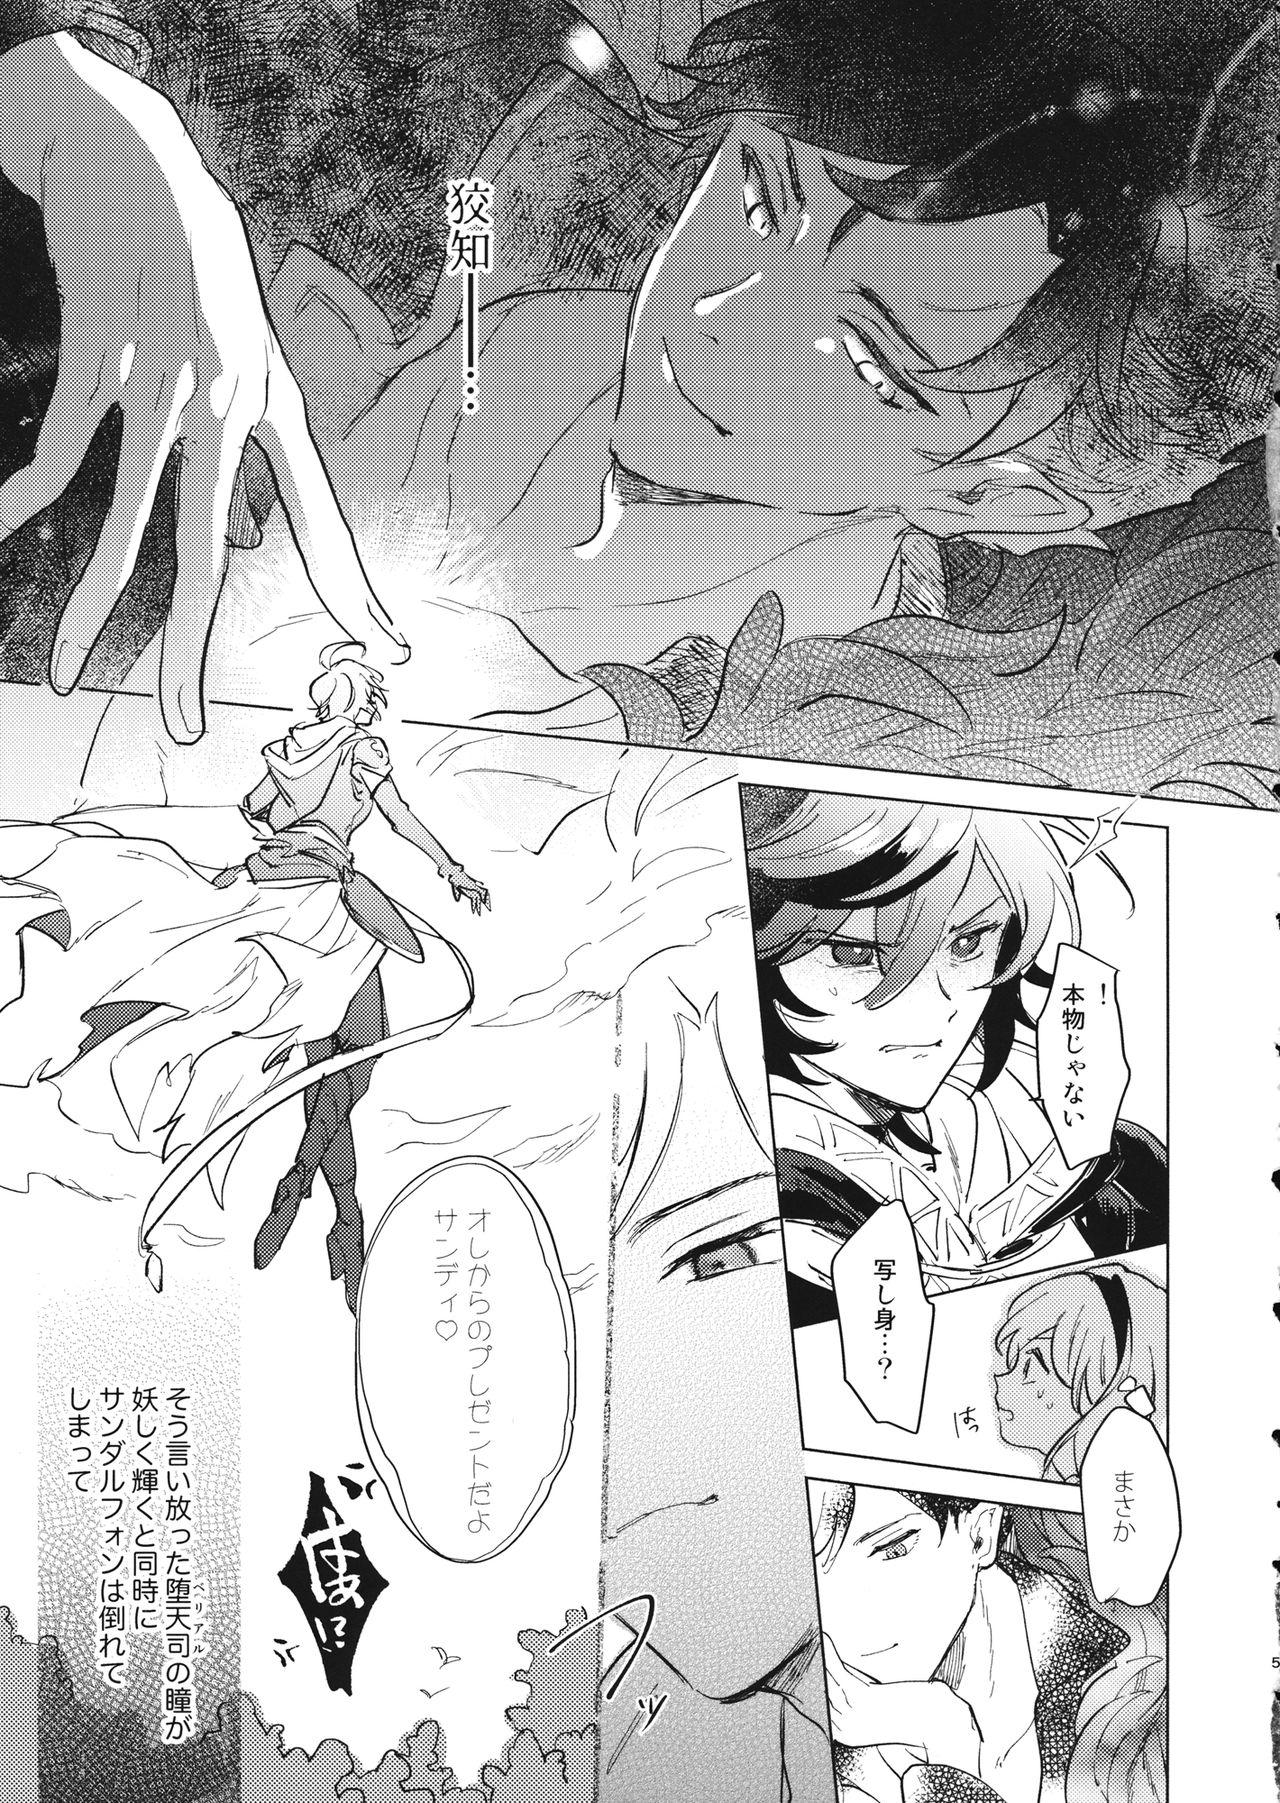 Caliente 災い転じて熱となれ - Granblue fantasy Ginger - Page 6